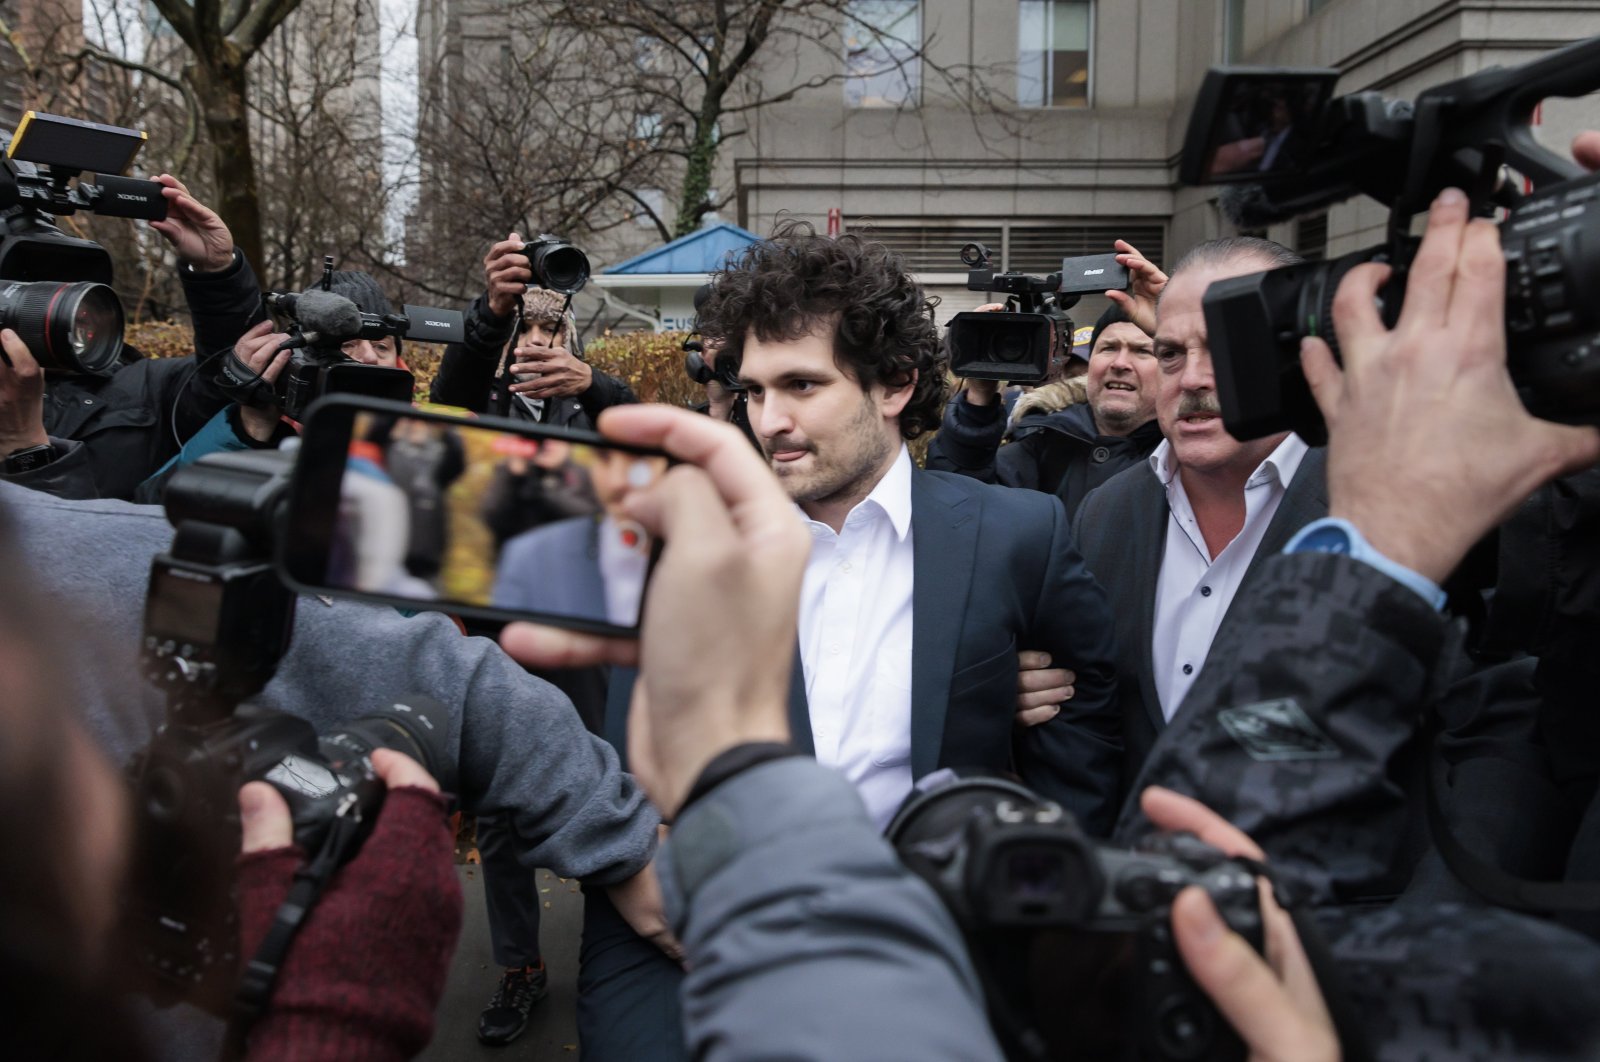 Cryptocurrency entrepreneur Sam Bankman-Fried (C) is led out of a U.S. federal courthouse after being released on bail following an arraignment, New York, U.S., Dec. 22. 2022. (EPA Photo)